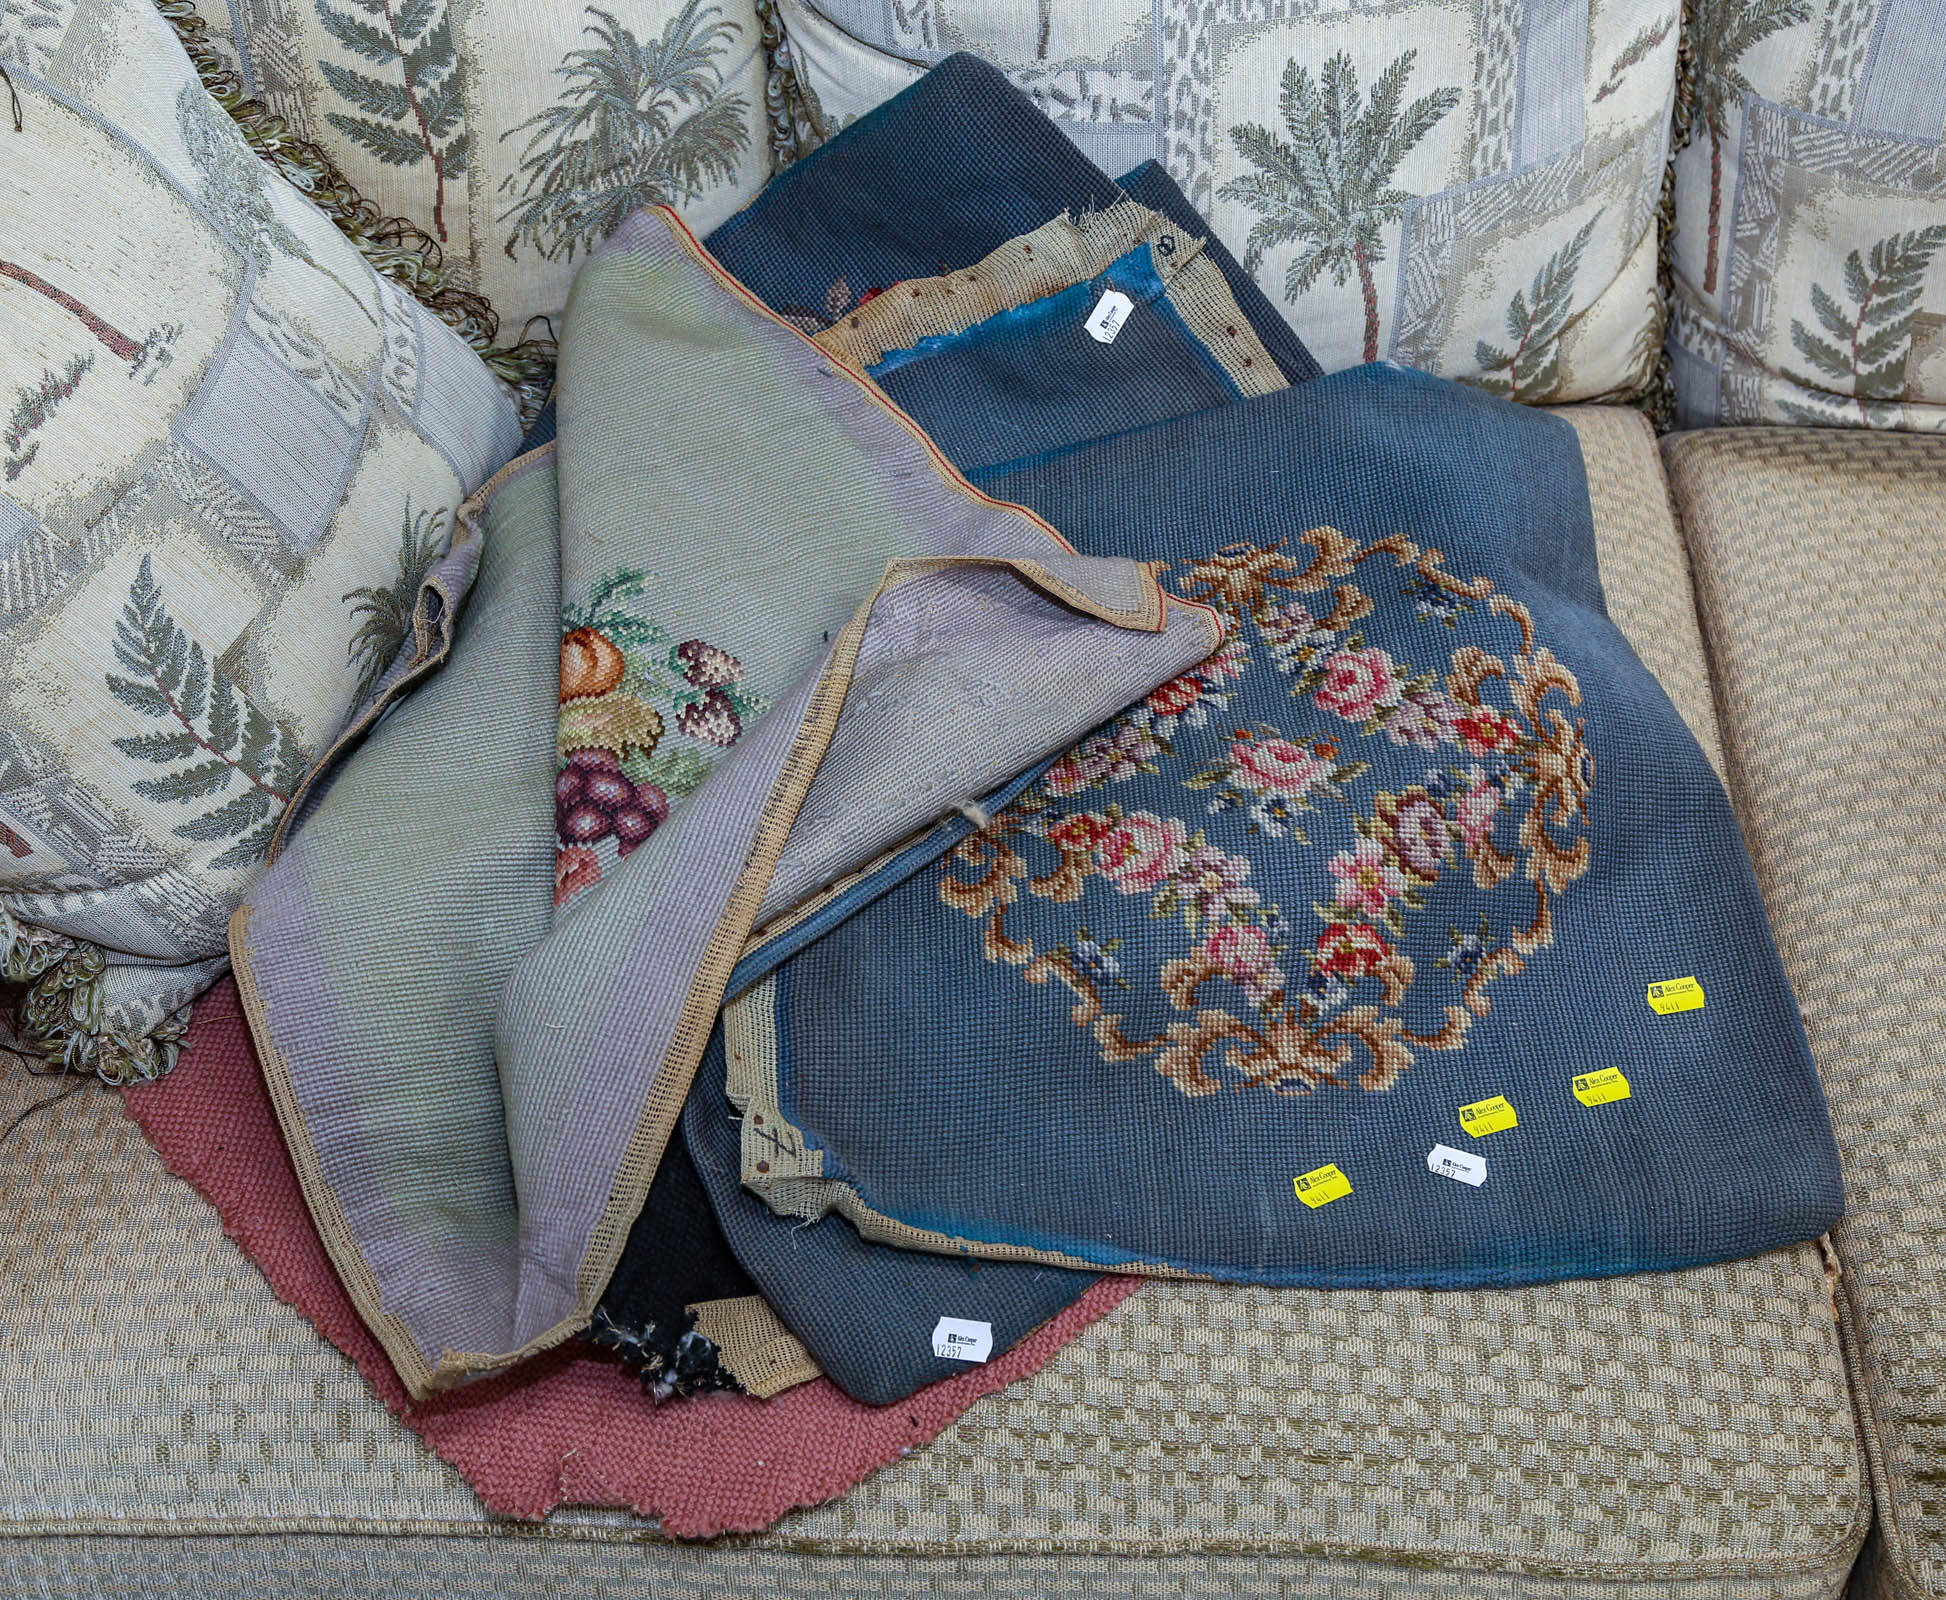 GROUP OF NEEDLEWORK SEAT COVERS